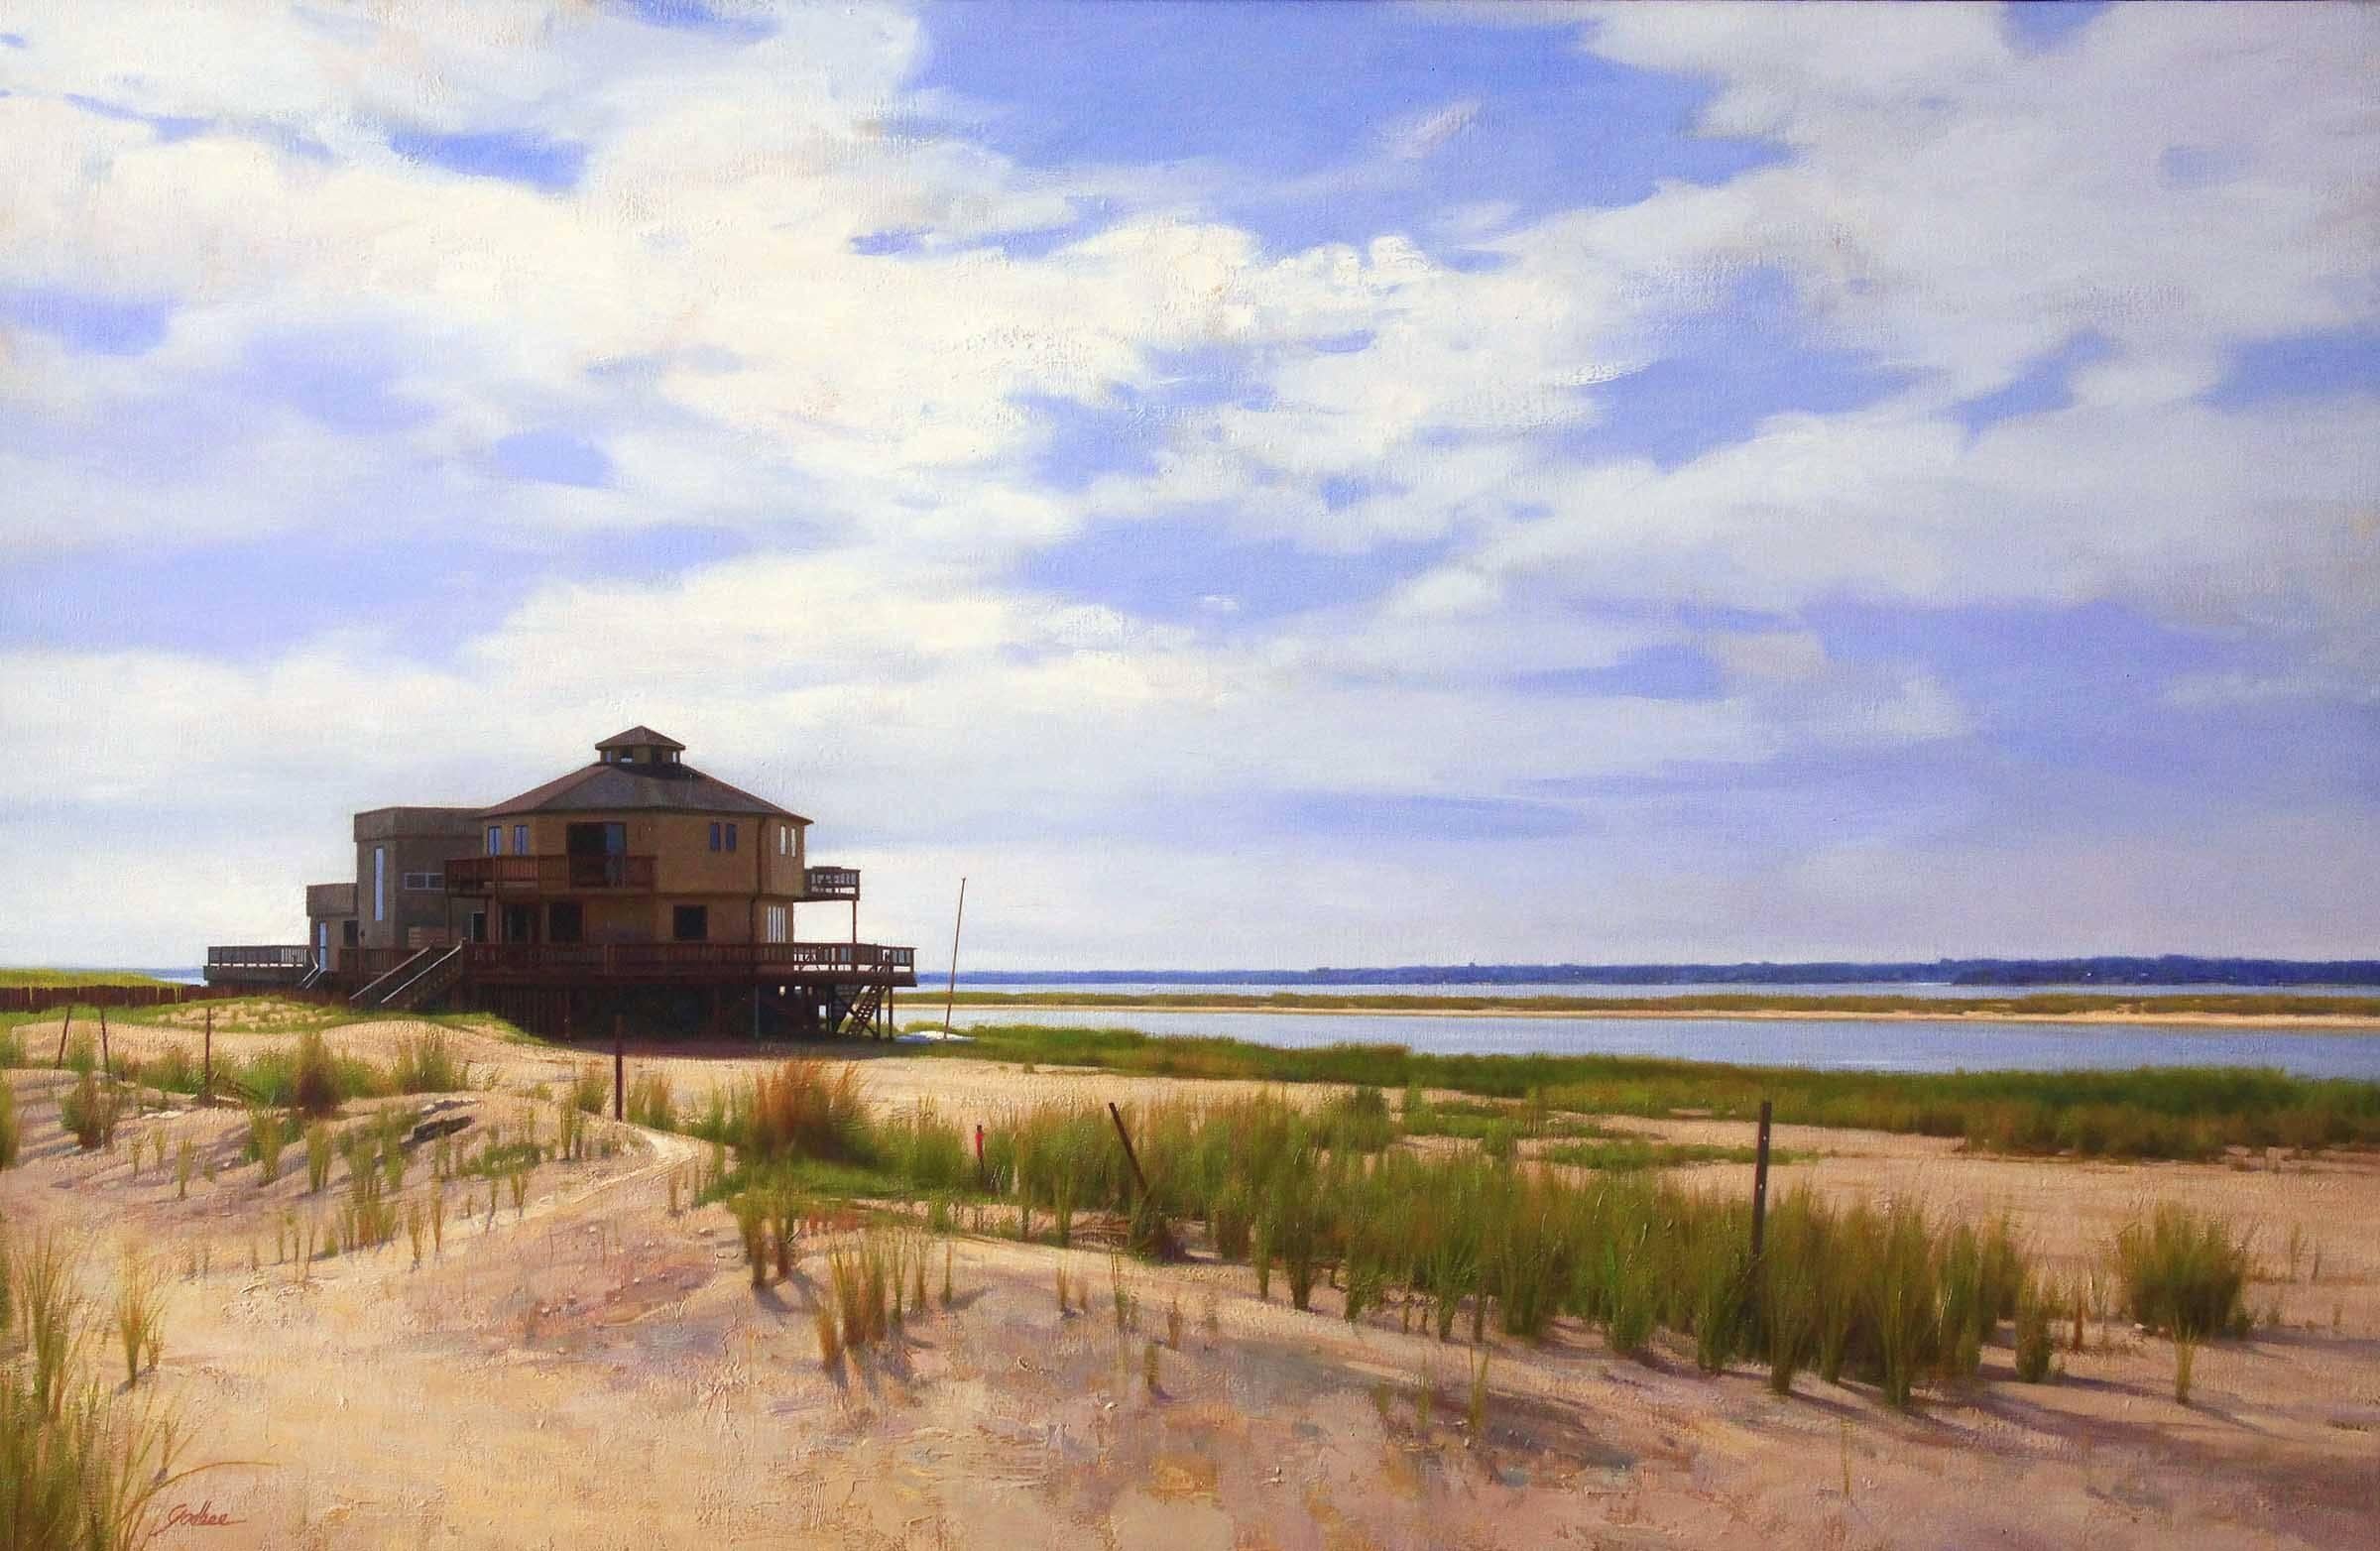 Gary Godbee Landscape Painting - SOUTHAMPTON BAY, landscape, photo-realism, house on the water, sand, ocean